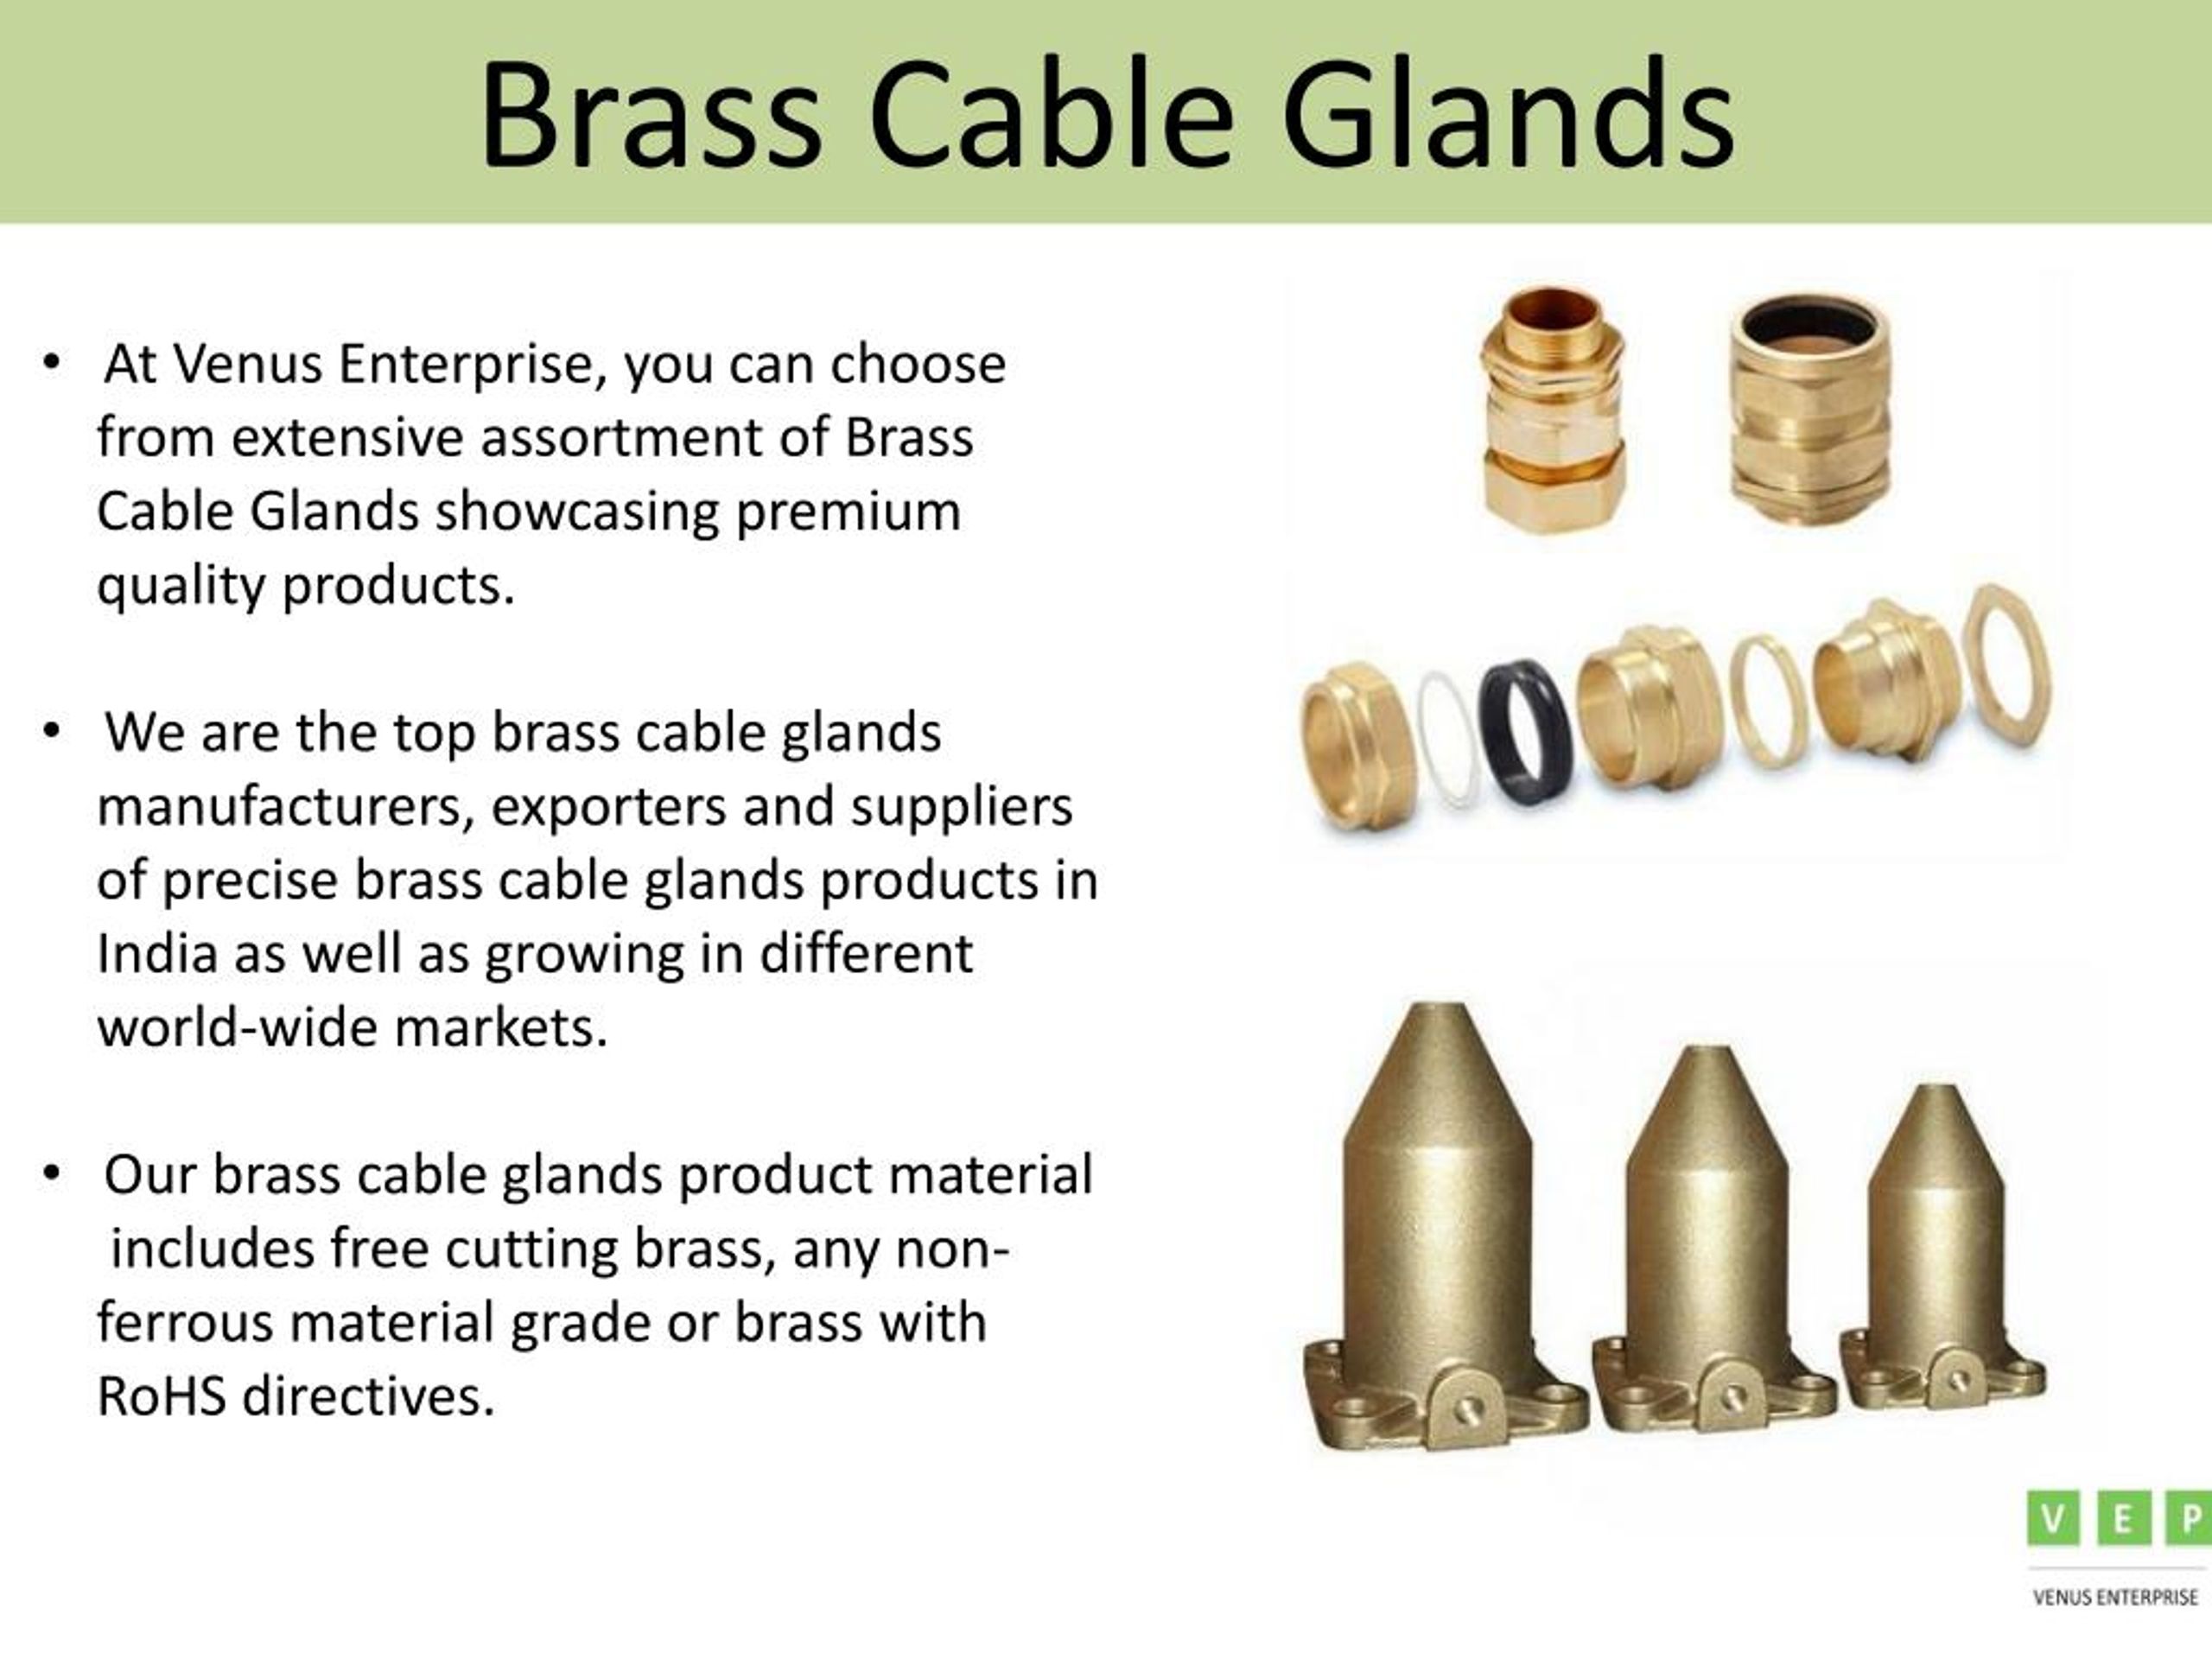 PPT - Best Brass Pipe Fittings Manufacturers and Suppliers - VE